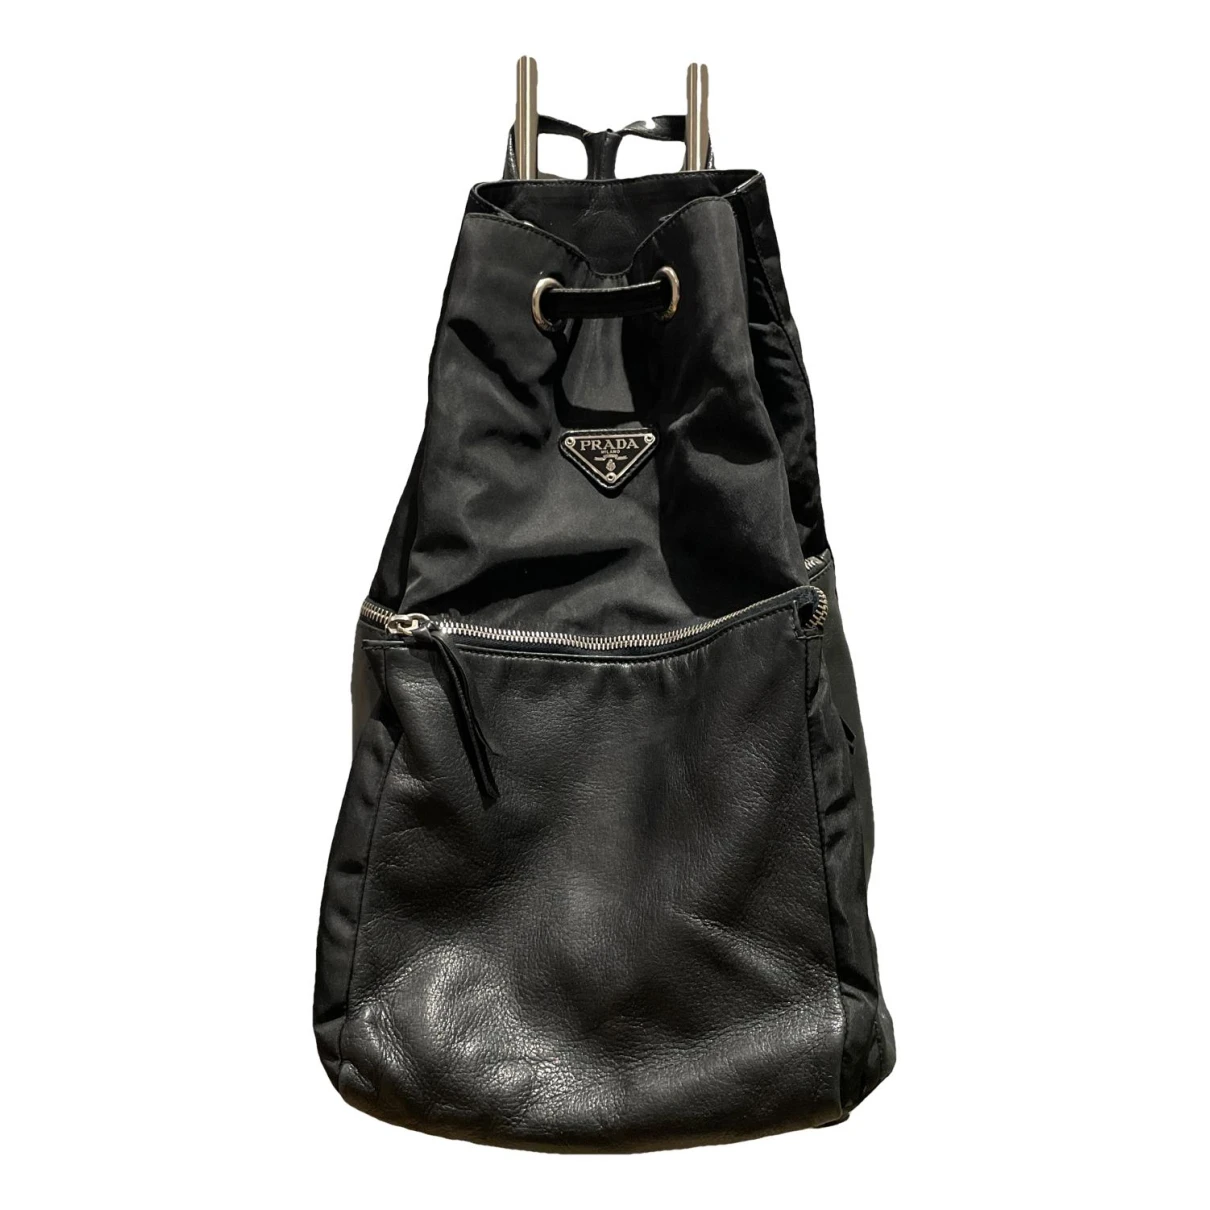 bags Prada backpacks for Female Leather. Used condition